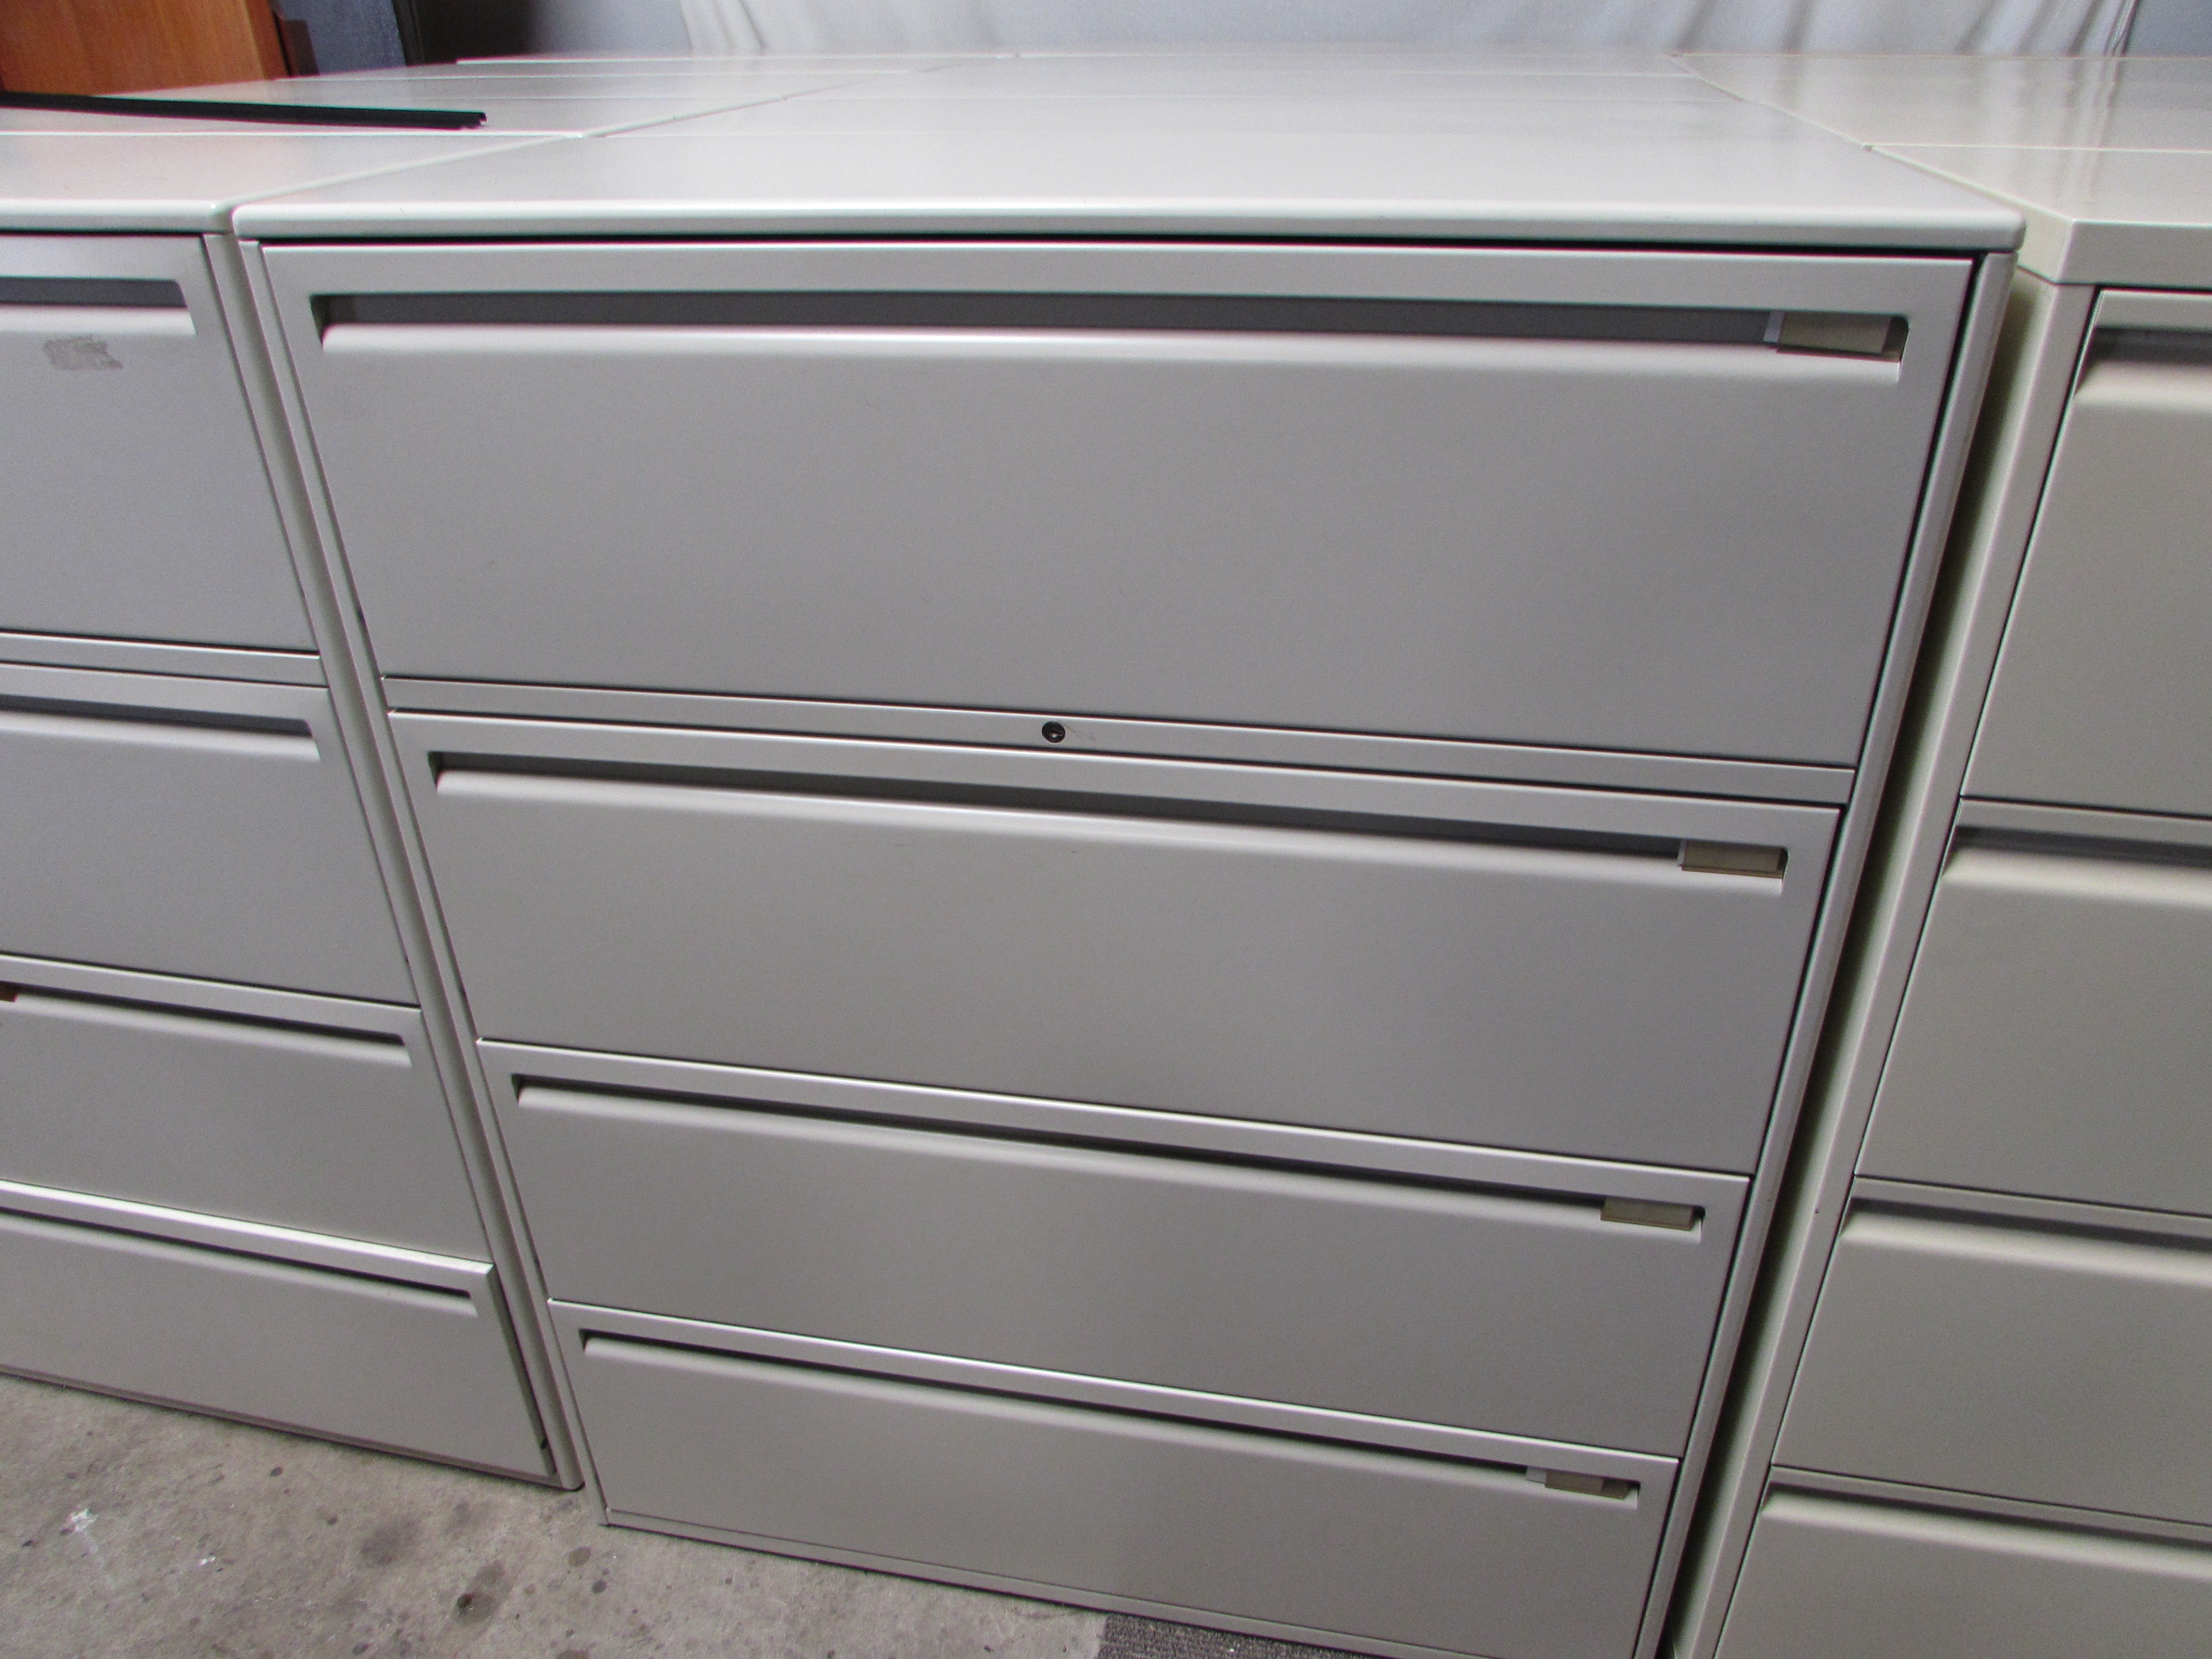 Haworth Off White 4 Drawer 42 Wide Lateral File Cabinets